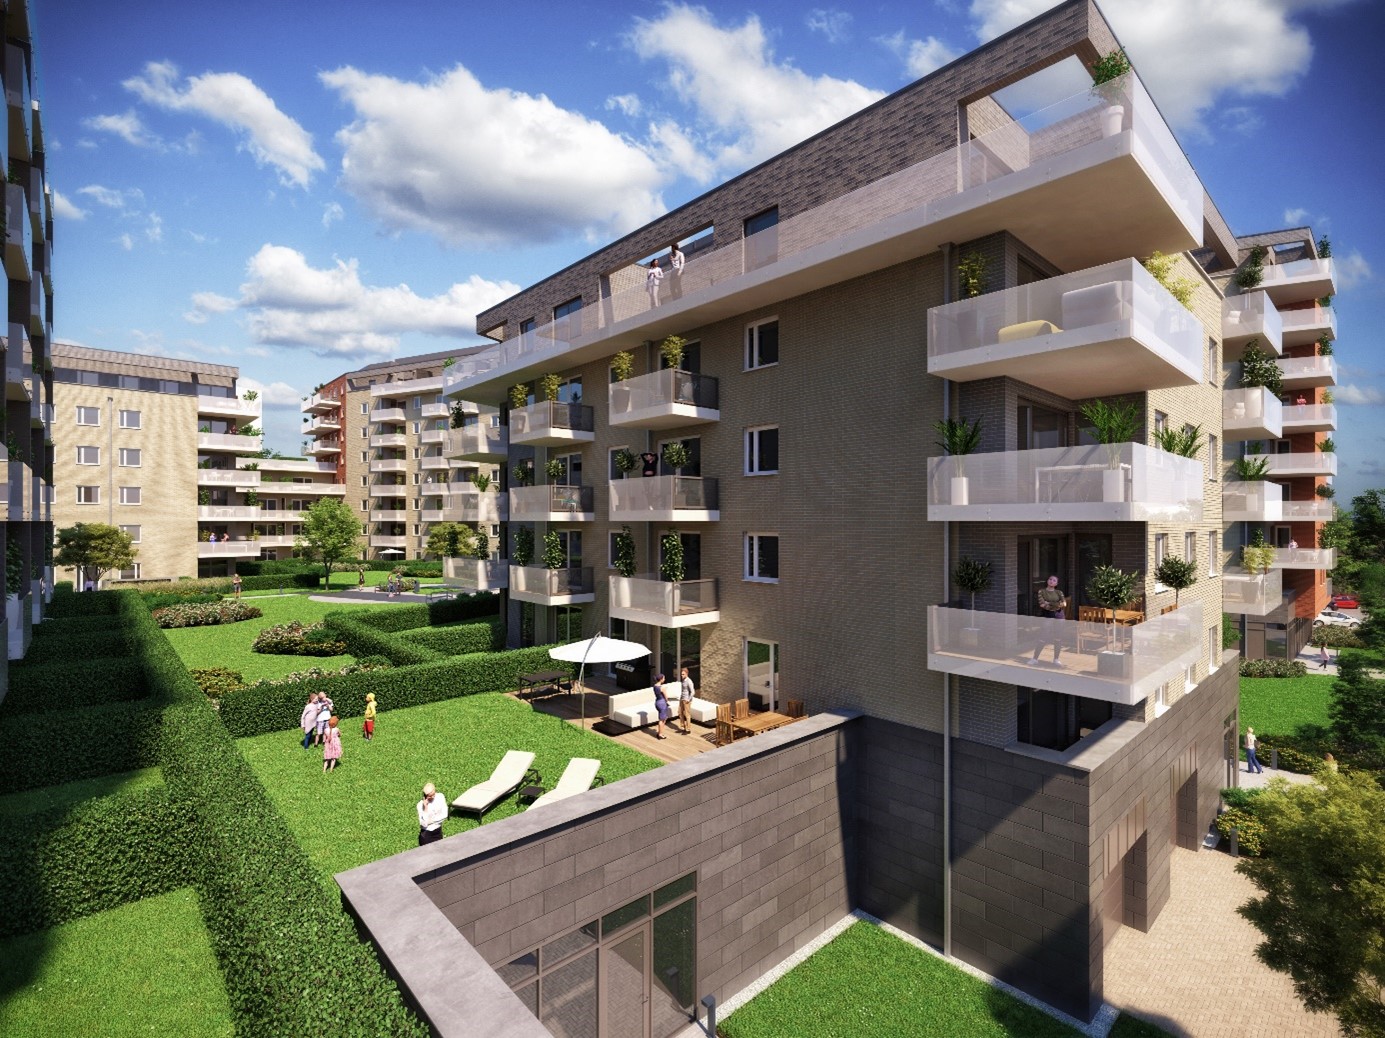 Building structure completed at Kassák Terrace, the third phase of LIVING’s Kassák project